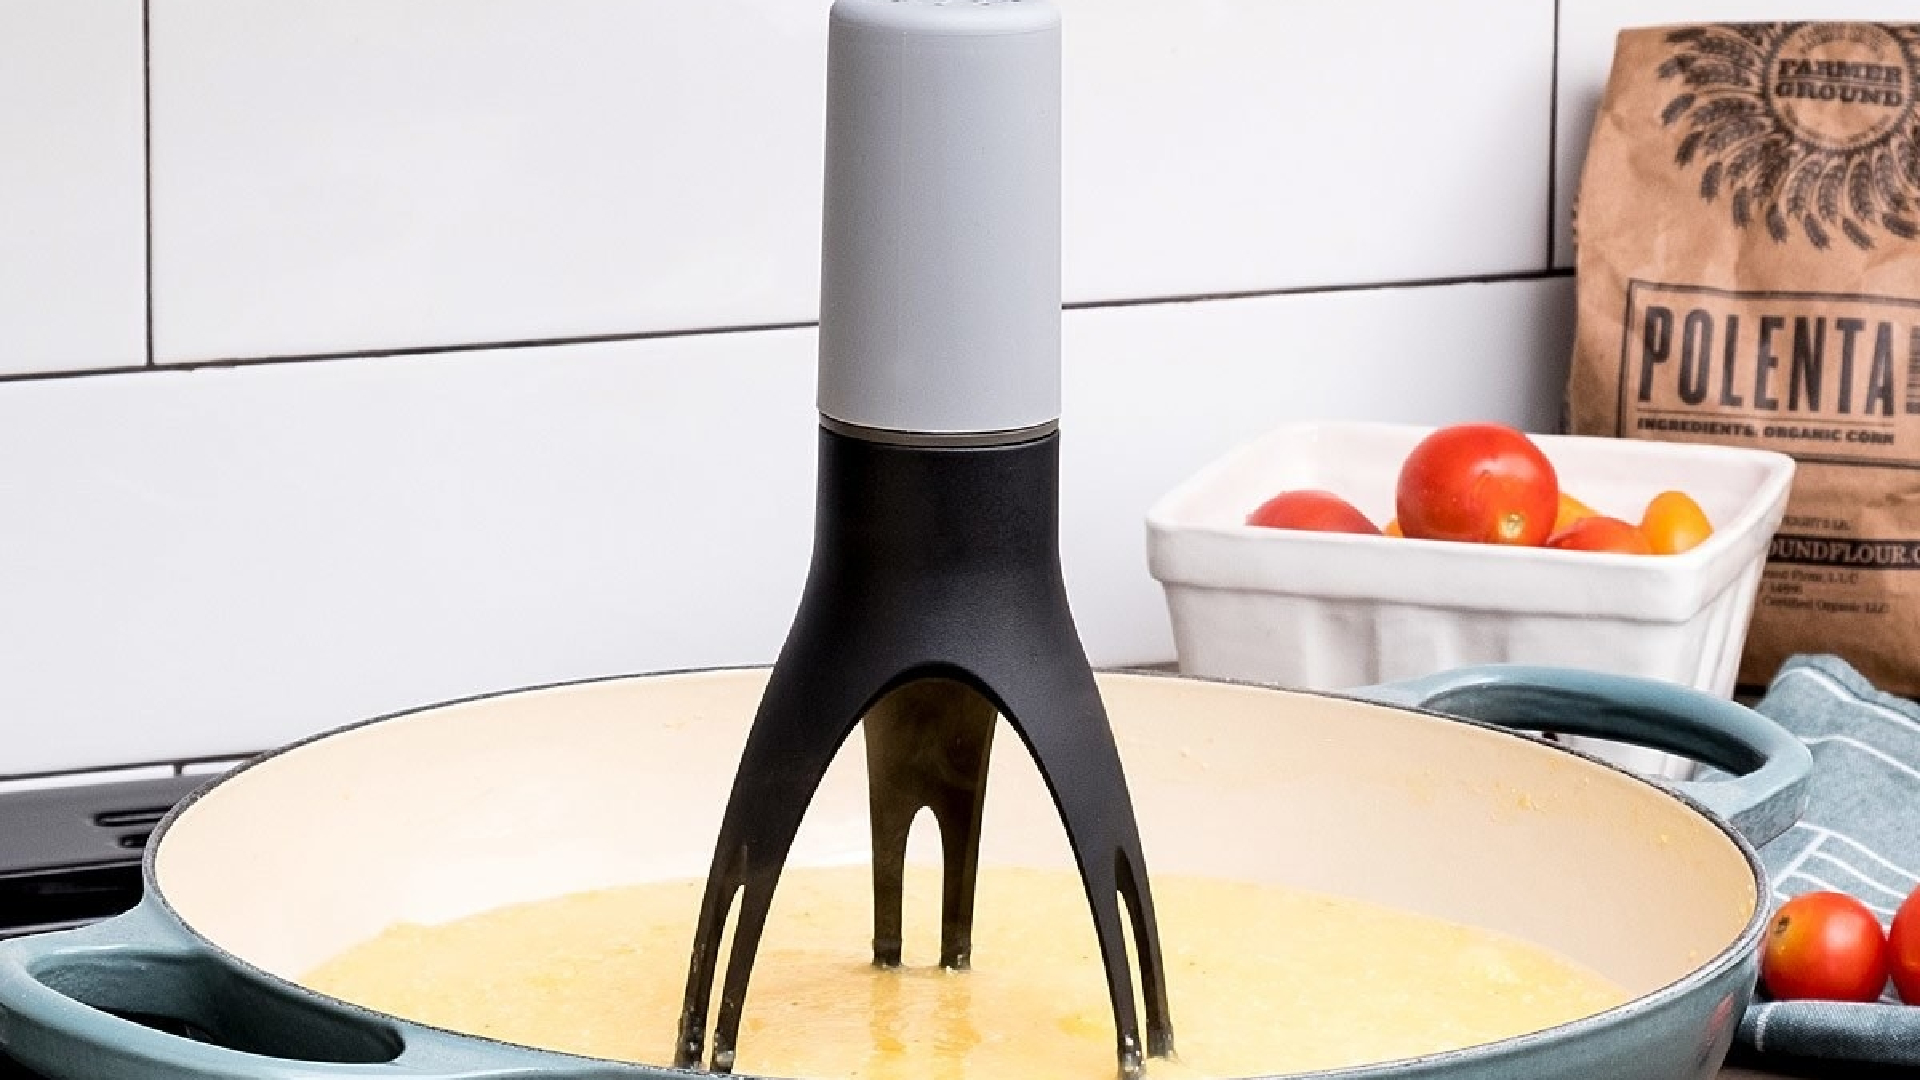  GENAU Automatic Stirrer for Cooking - Hands Free